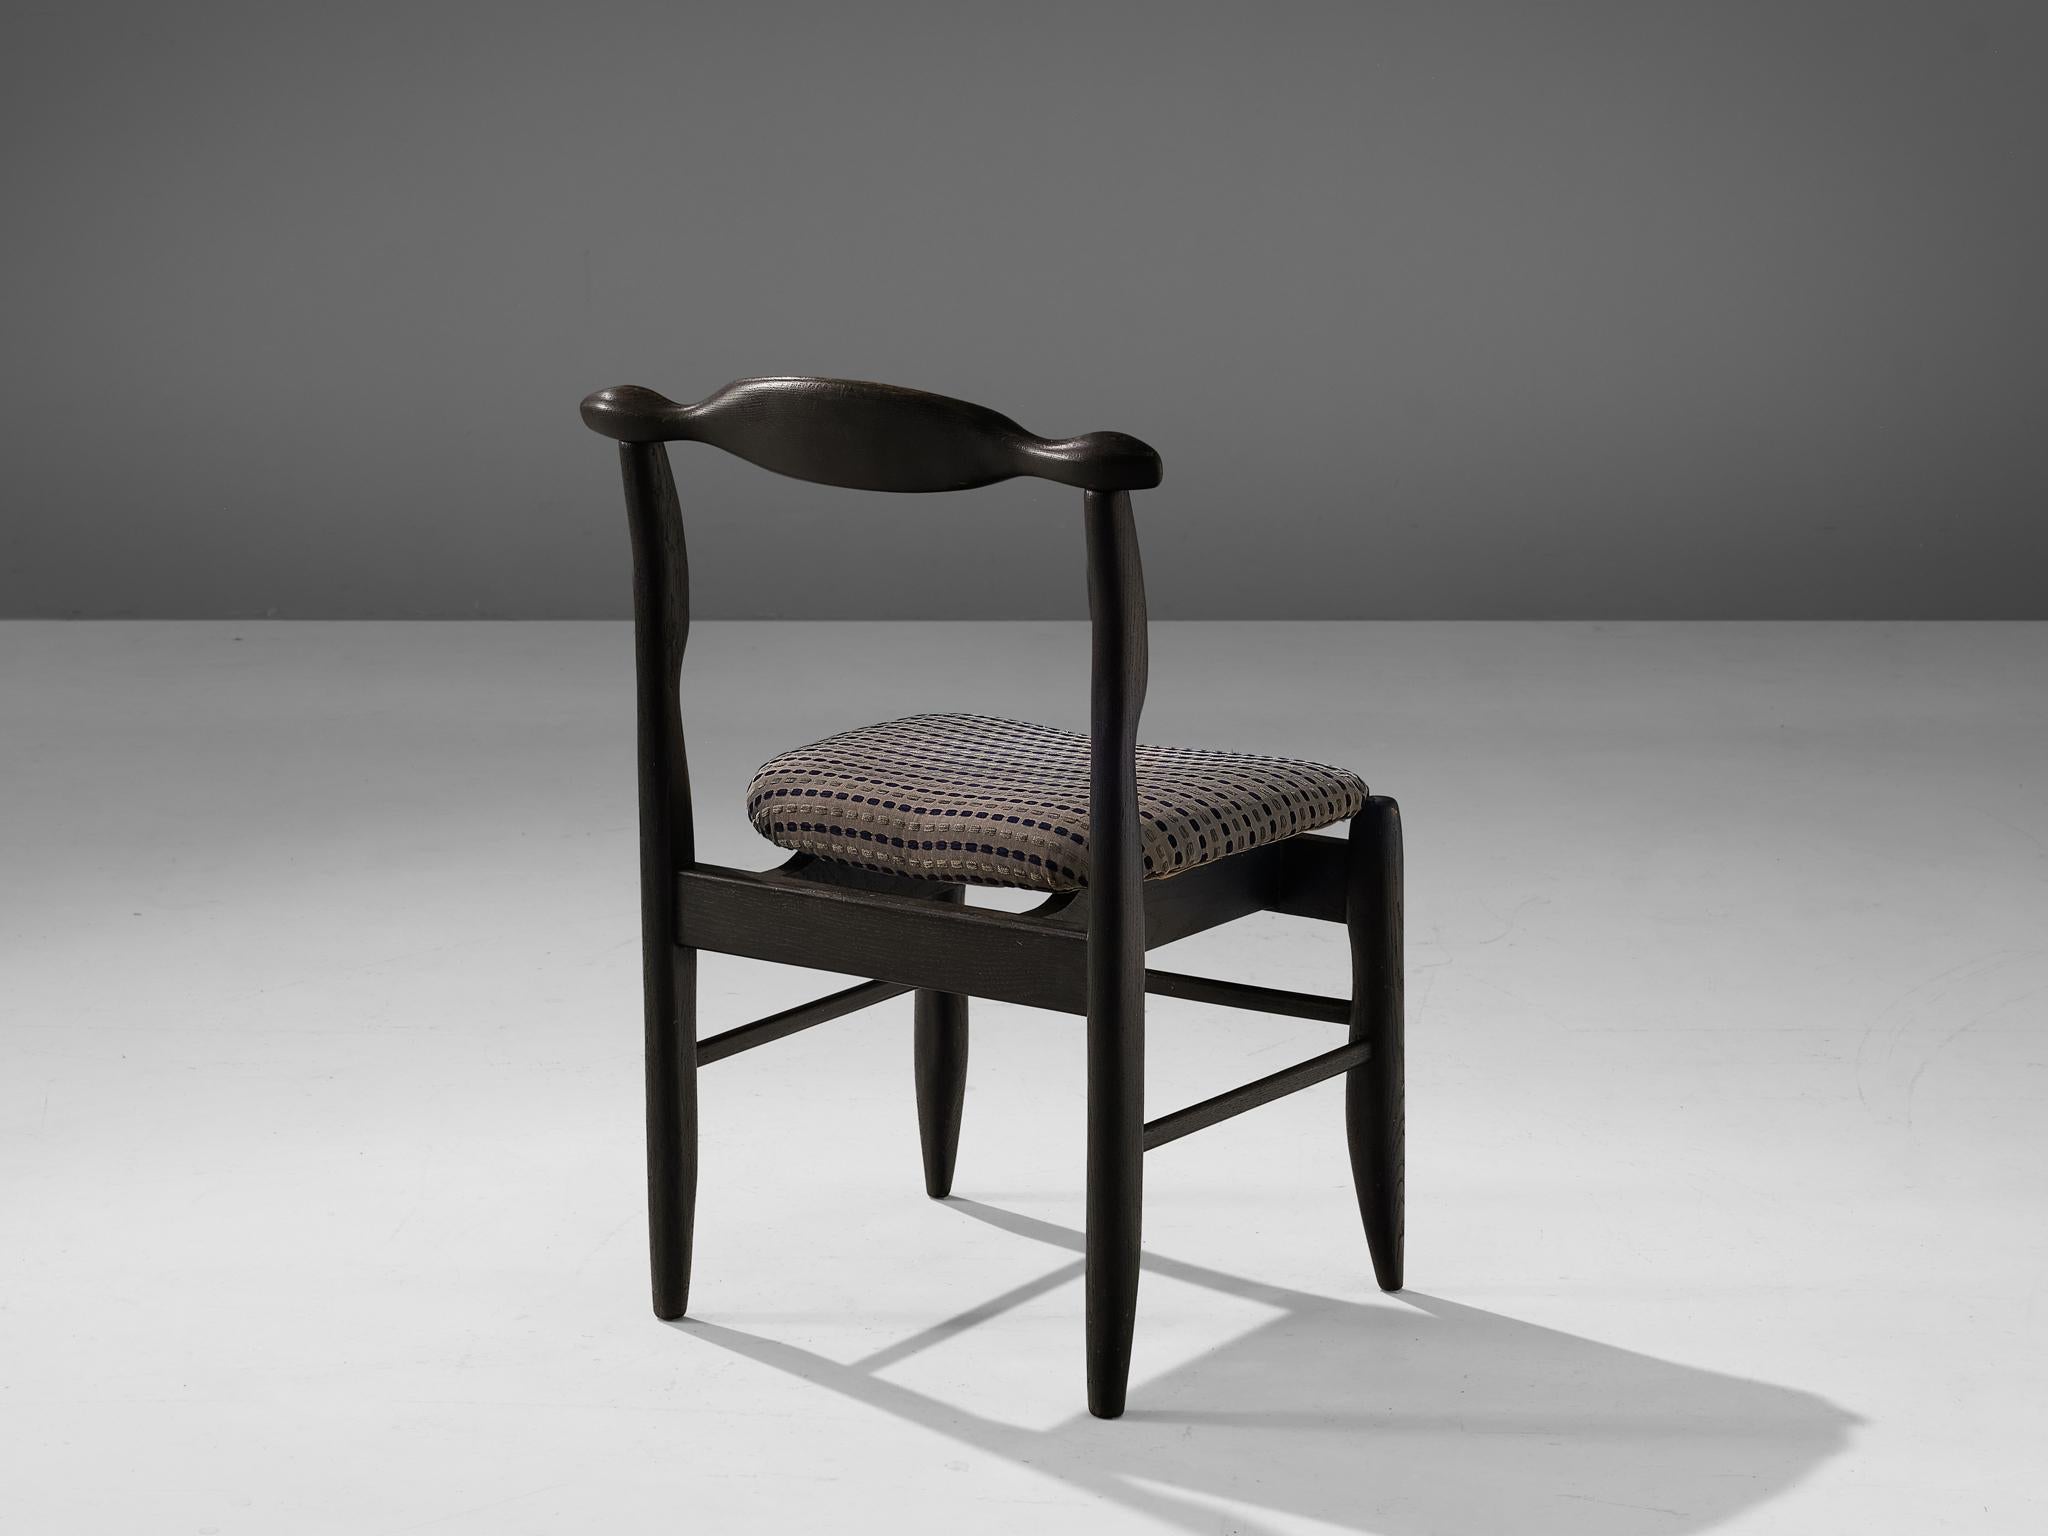 Guillerme et Chambron for Votre Maison, dining chair model 'Fumay,' oak and fabric, France, 1960s.

Beautifully shaped chair in darkened oak by French designer duo Jacques Chambron and Robert Guillerme. This dining chair show beautiful lines in